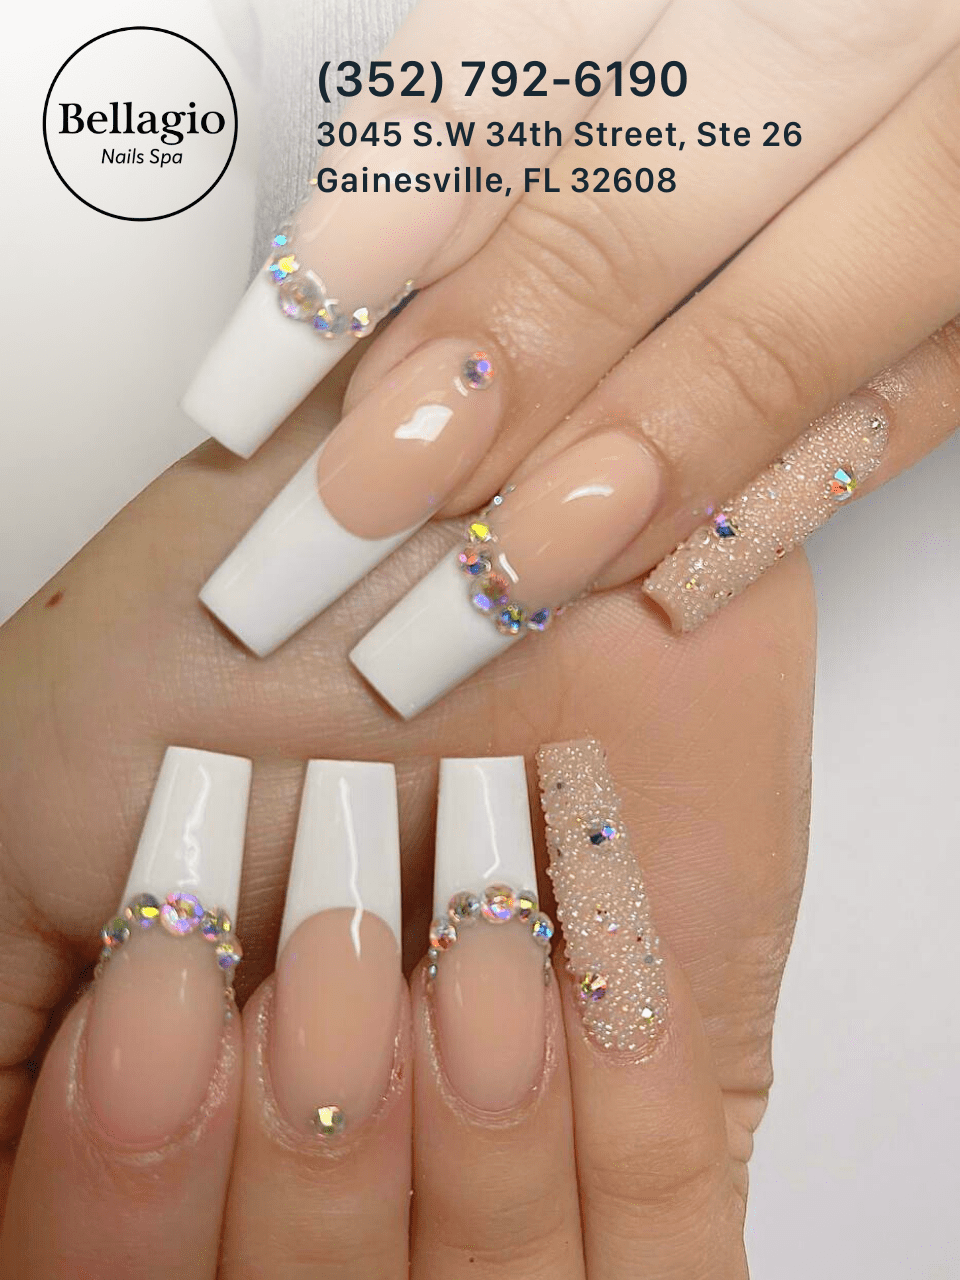 You are currently viewing BLOG 3: Bellagio Nail Spa | Nail Salon | Gainesville FL 32608